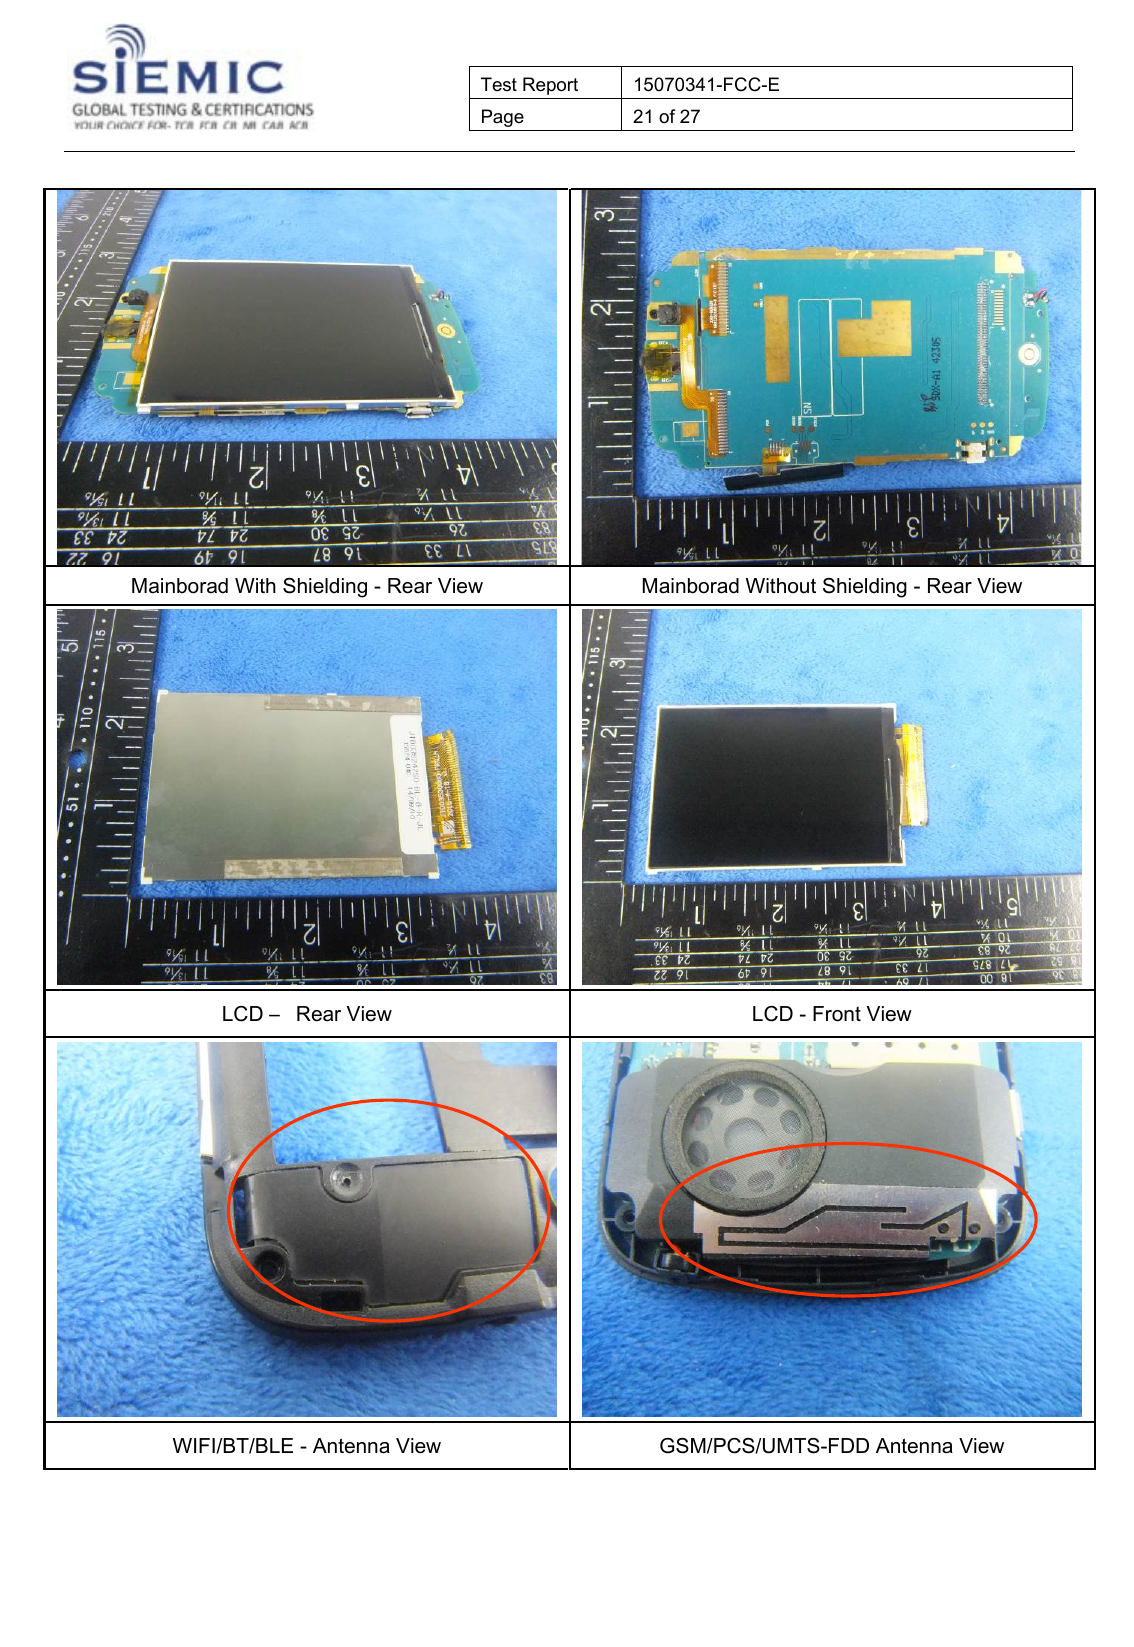   Test Report  15070341-FCC-E Page  21 of 27   Mainborad With Shielding - Rear View Mainborad Without Shielding - Rear ViewLCD –  Rear View  LCD - Front View WIFI/BT/BLE - Antenna View  GSM/PCS/UMTS-FDD Antenna View  